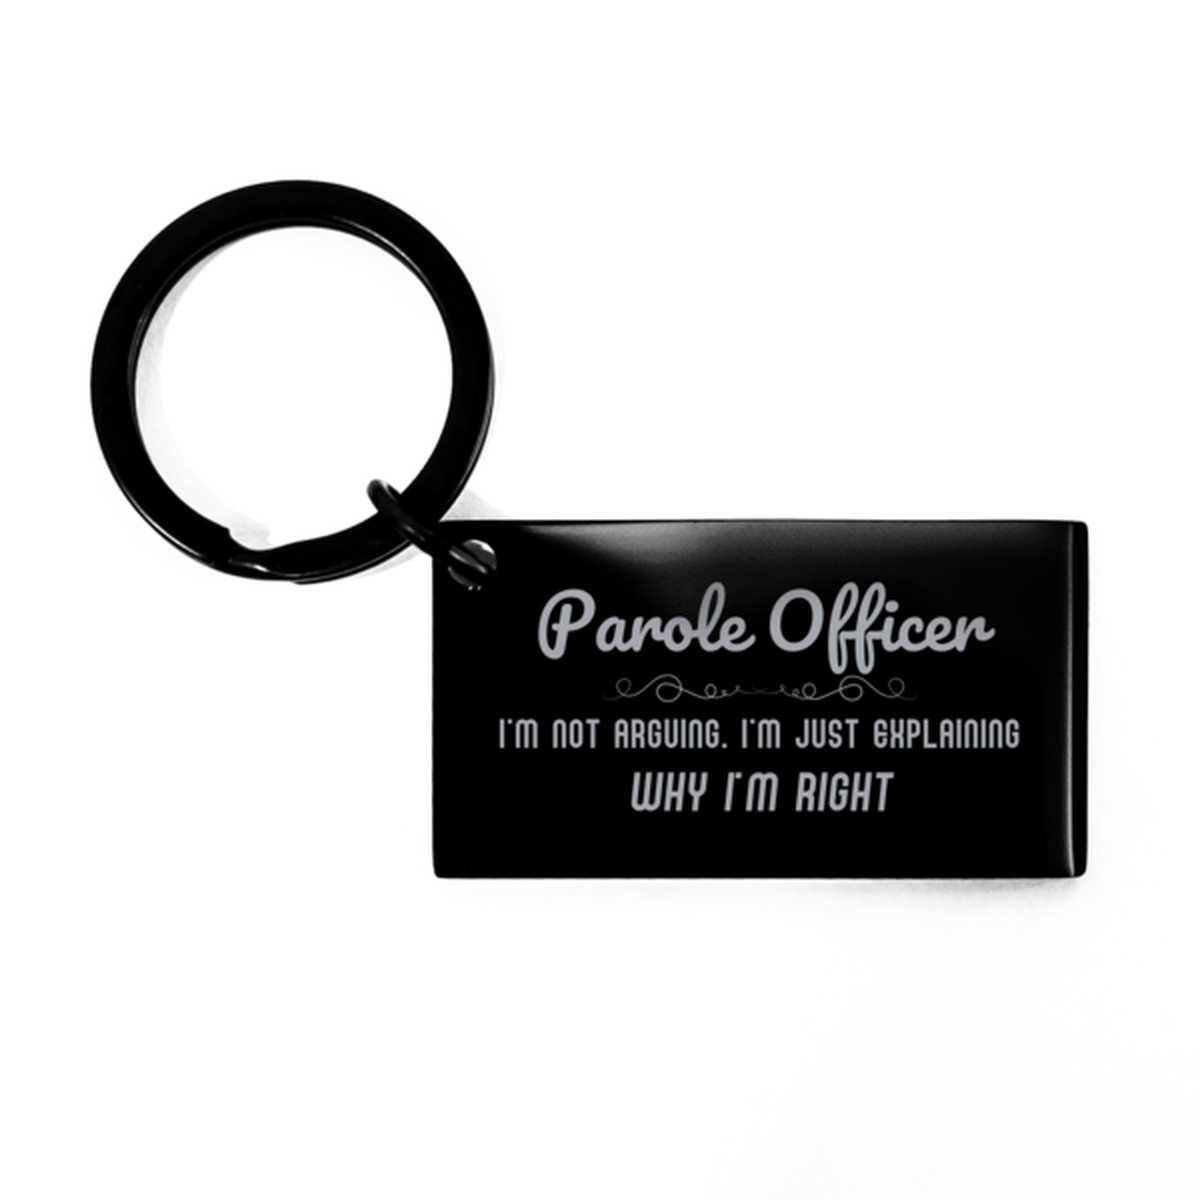 Parole Officer I'm not Arguing. I'm Just Explaining Why I'm RIGHT Keychain, Funny Saying Quote Parole Officer Gifts For Parole Officer Graduation Birthday Christmas Gifts for Men Women Coworker